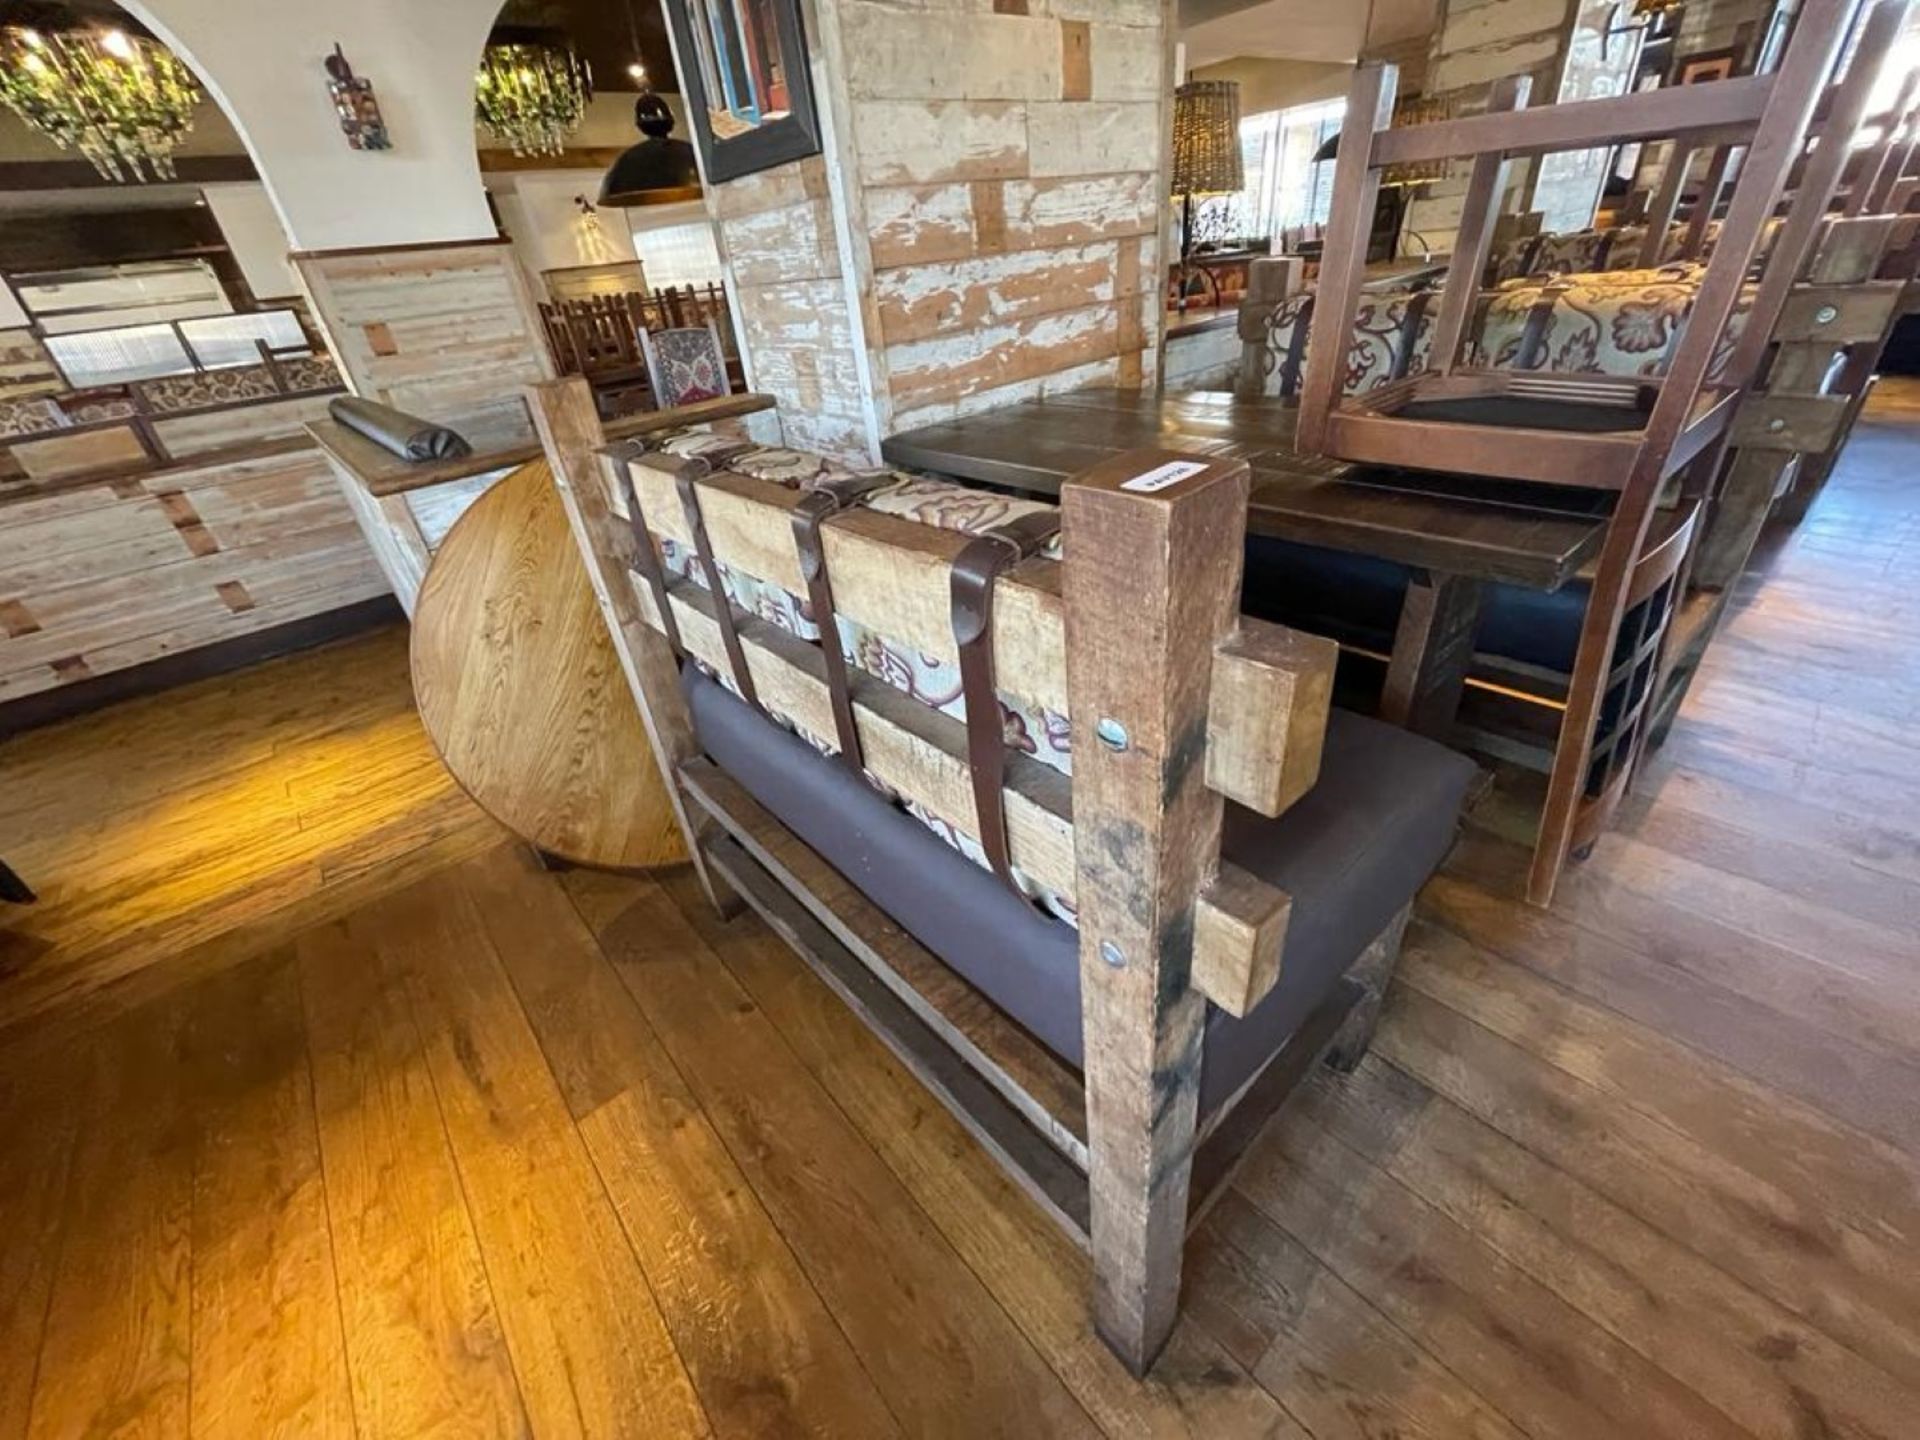 2 x Handcrafted Solid Wood Seating Benches With a Rustic Farmhouse Dining Table - Features Brown - Image 7 of 13